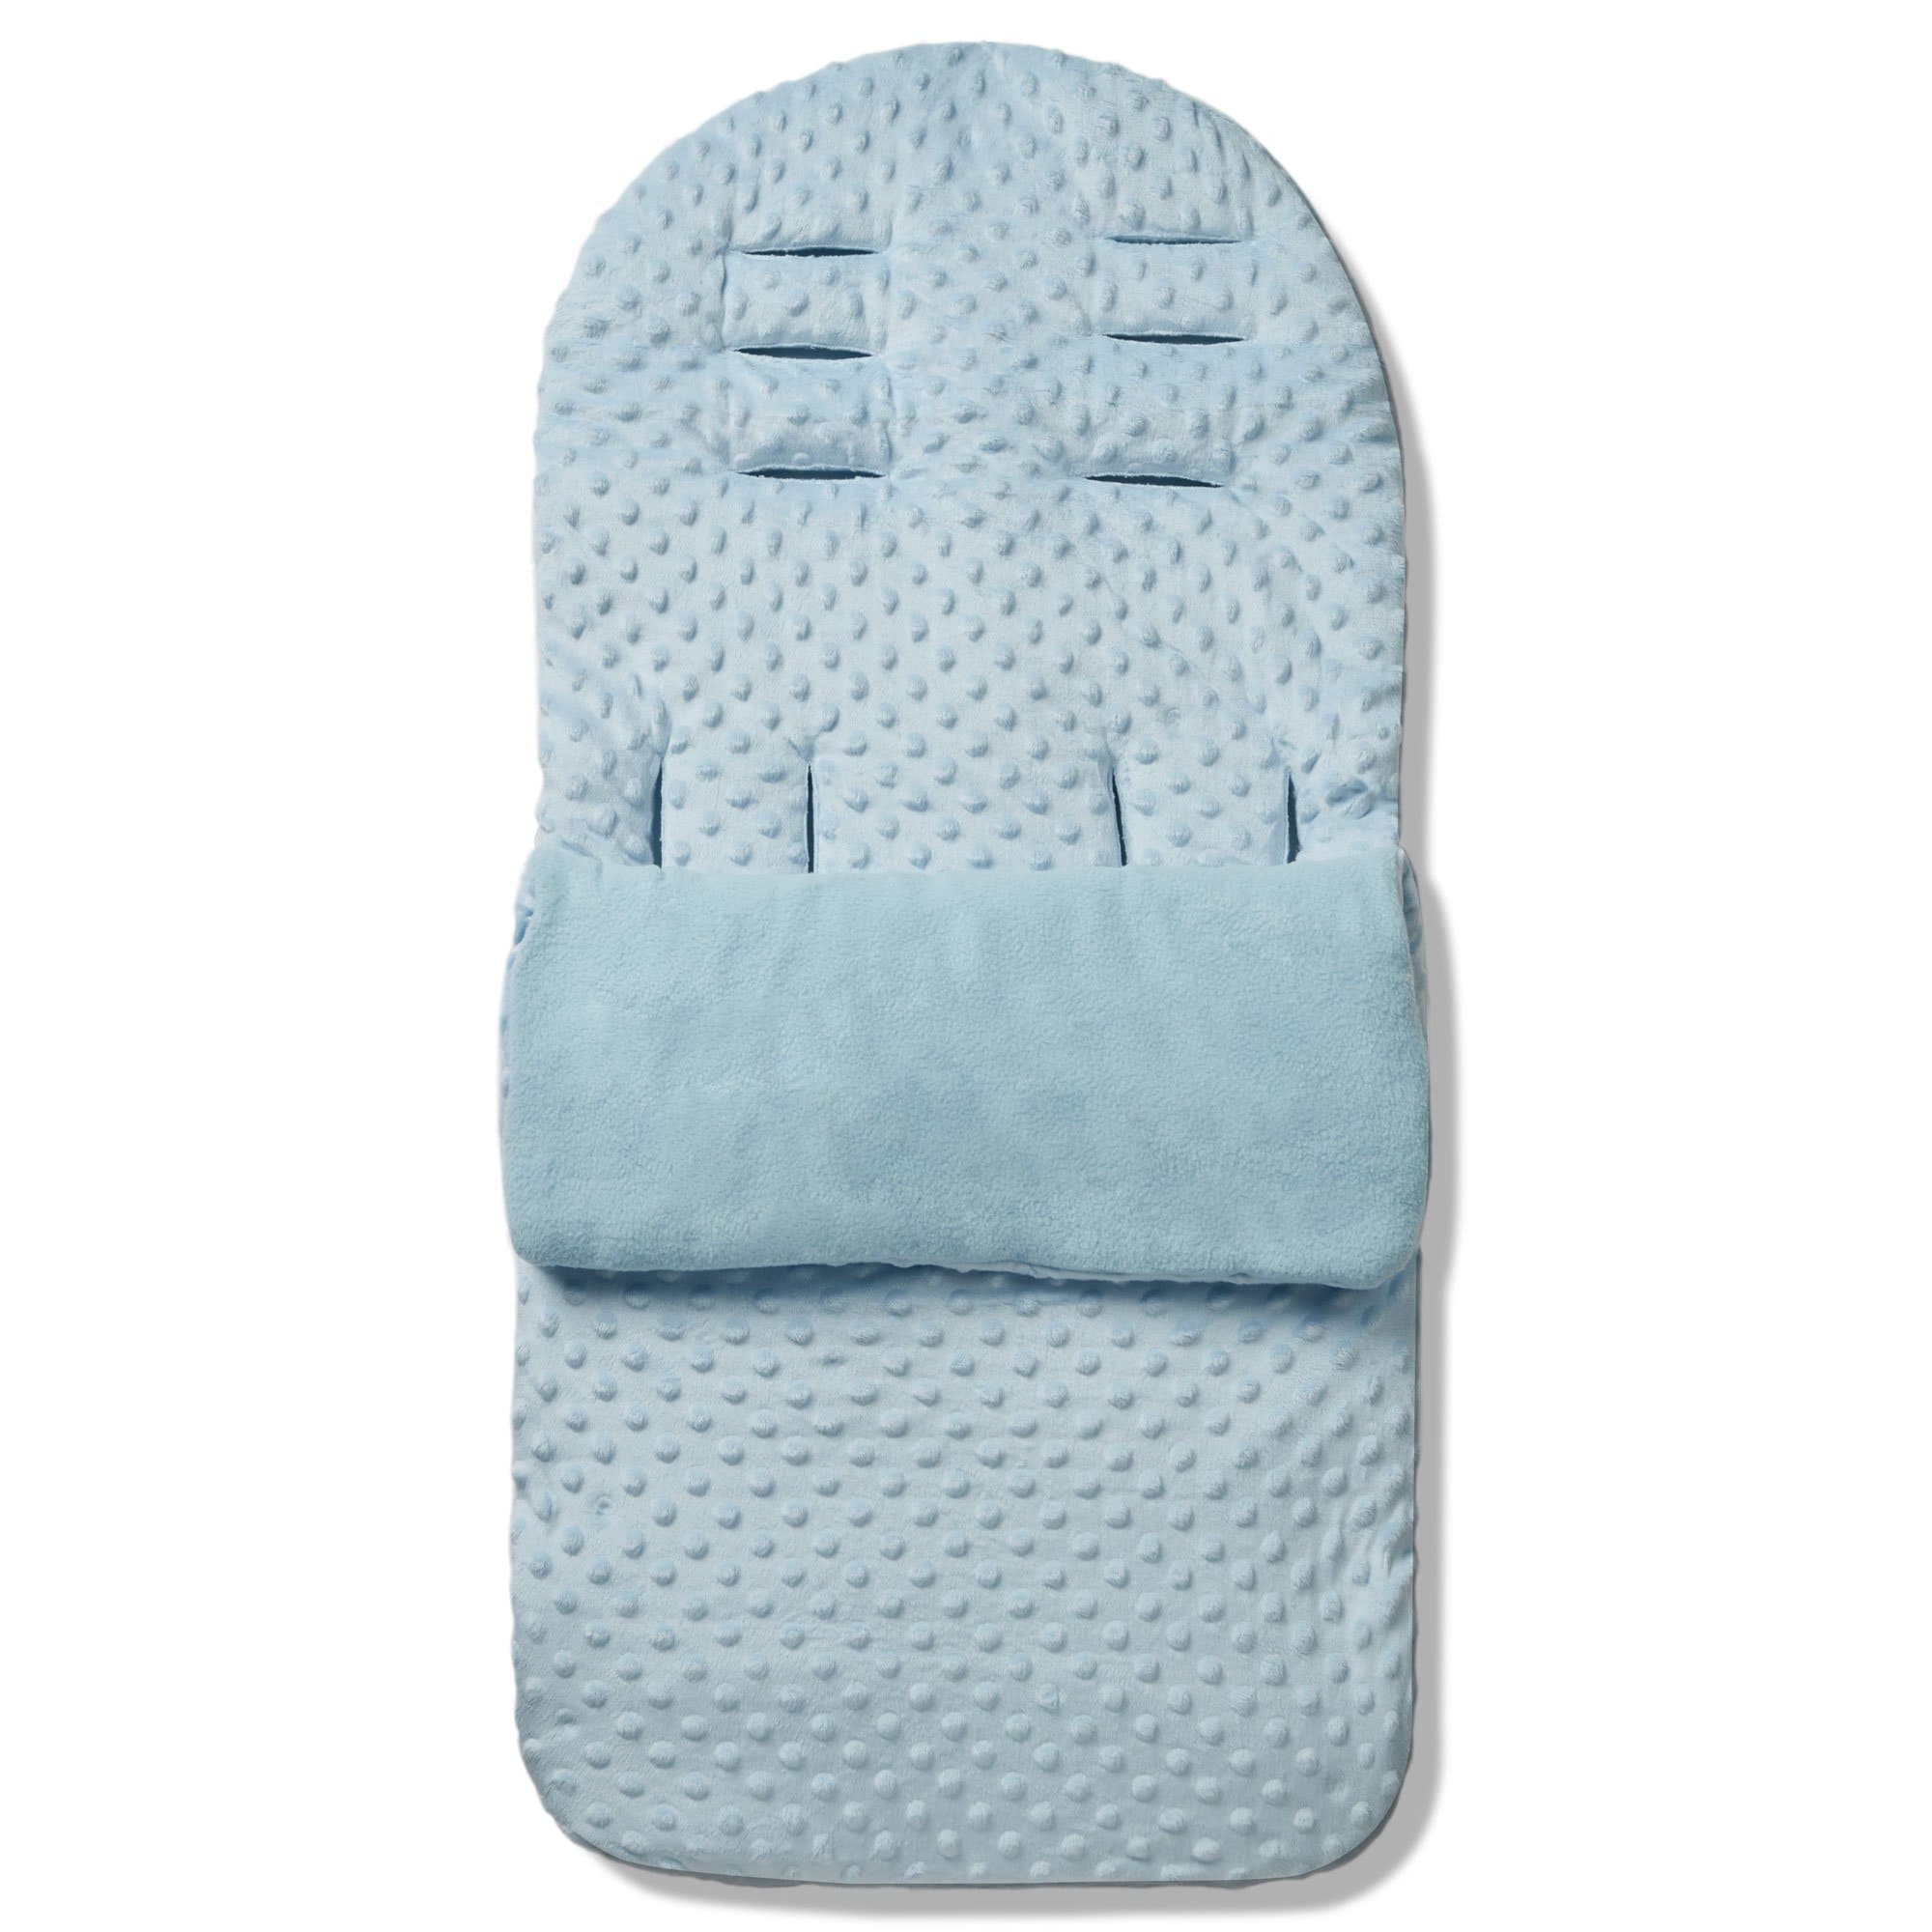 Dimple Footmuff / Cosy Toes Compatible with Jane - Blue / Fits All Models | For Your Little One